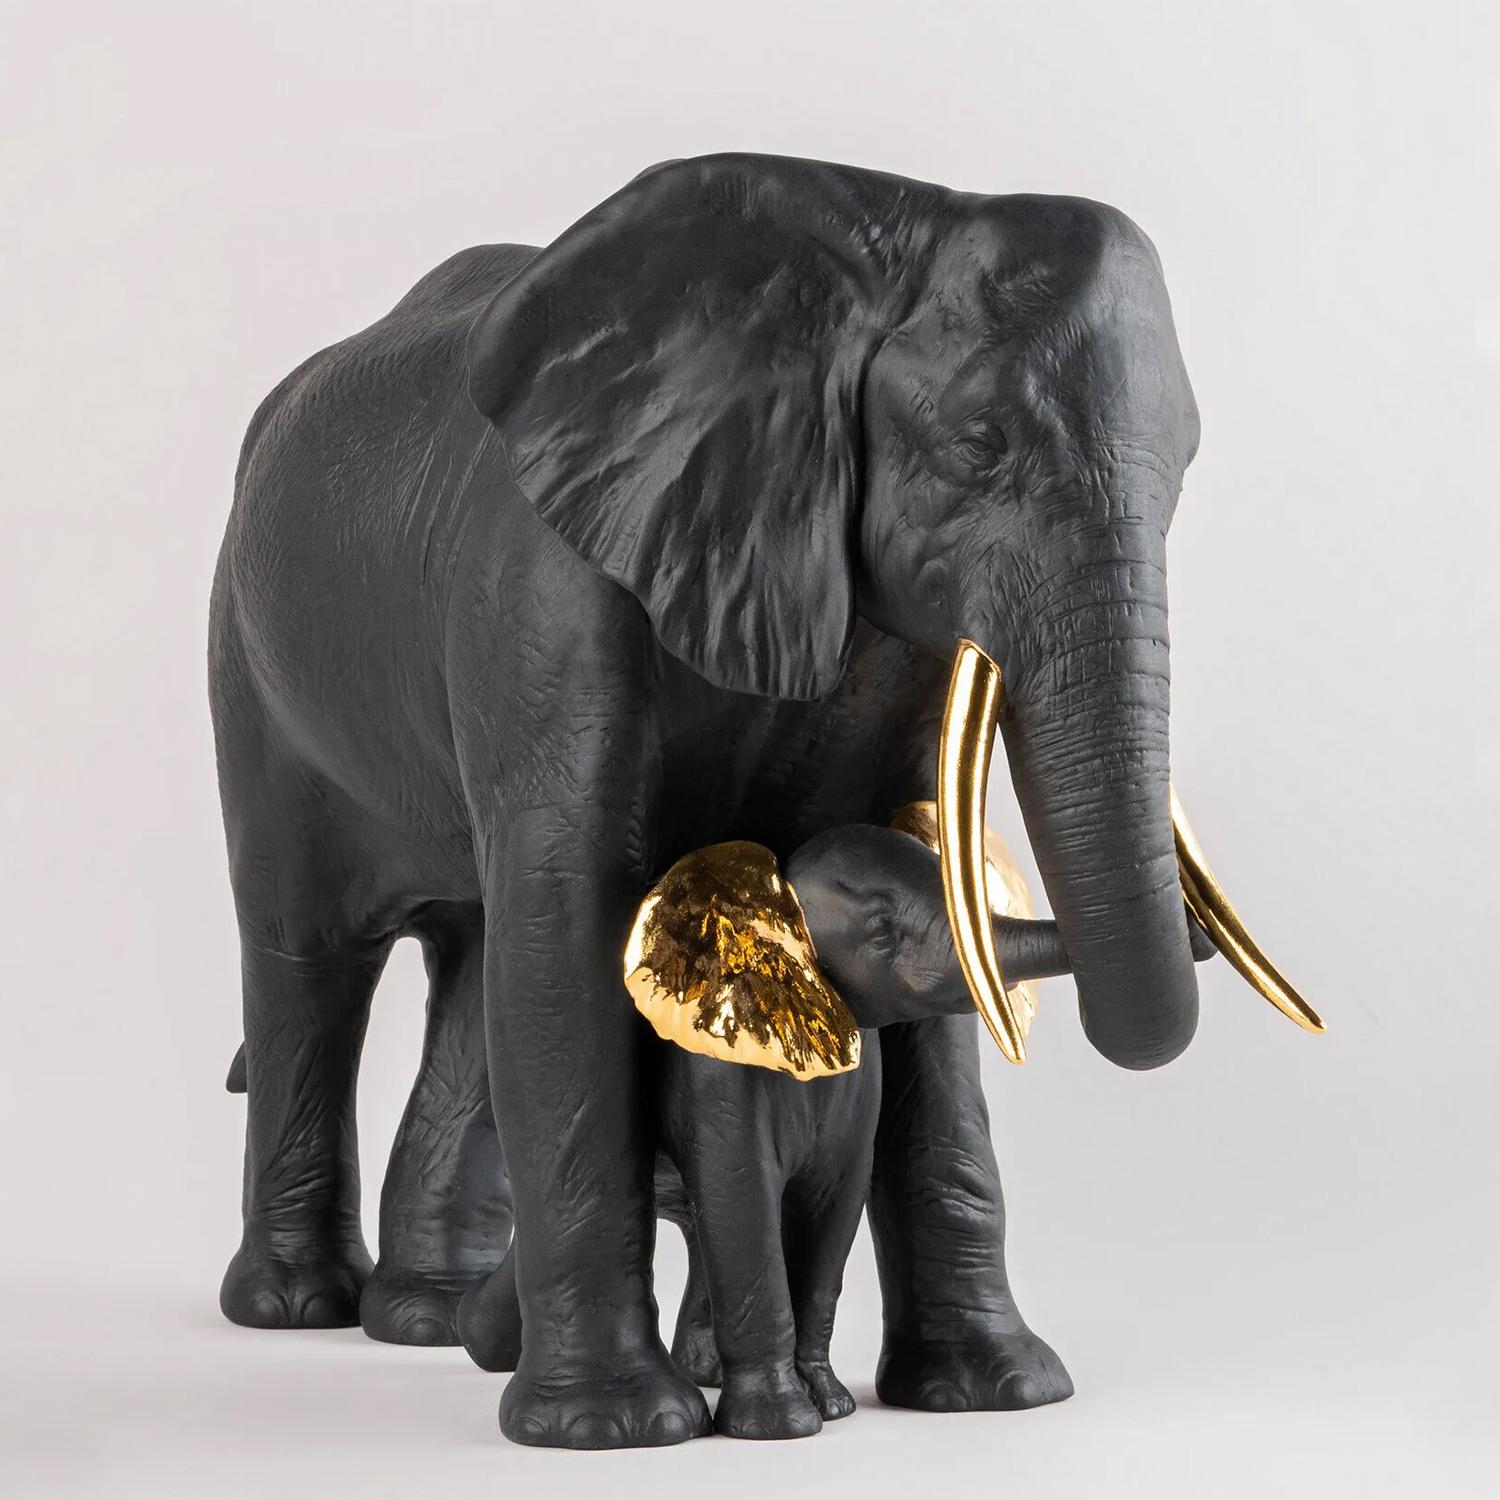 Sculpture elephants black with all structure in 
porcelain in black matte and shiny gold finish.